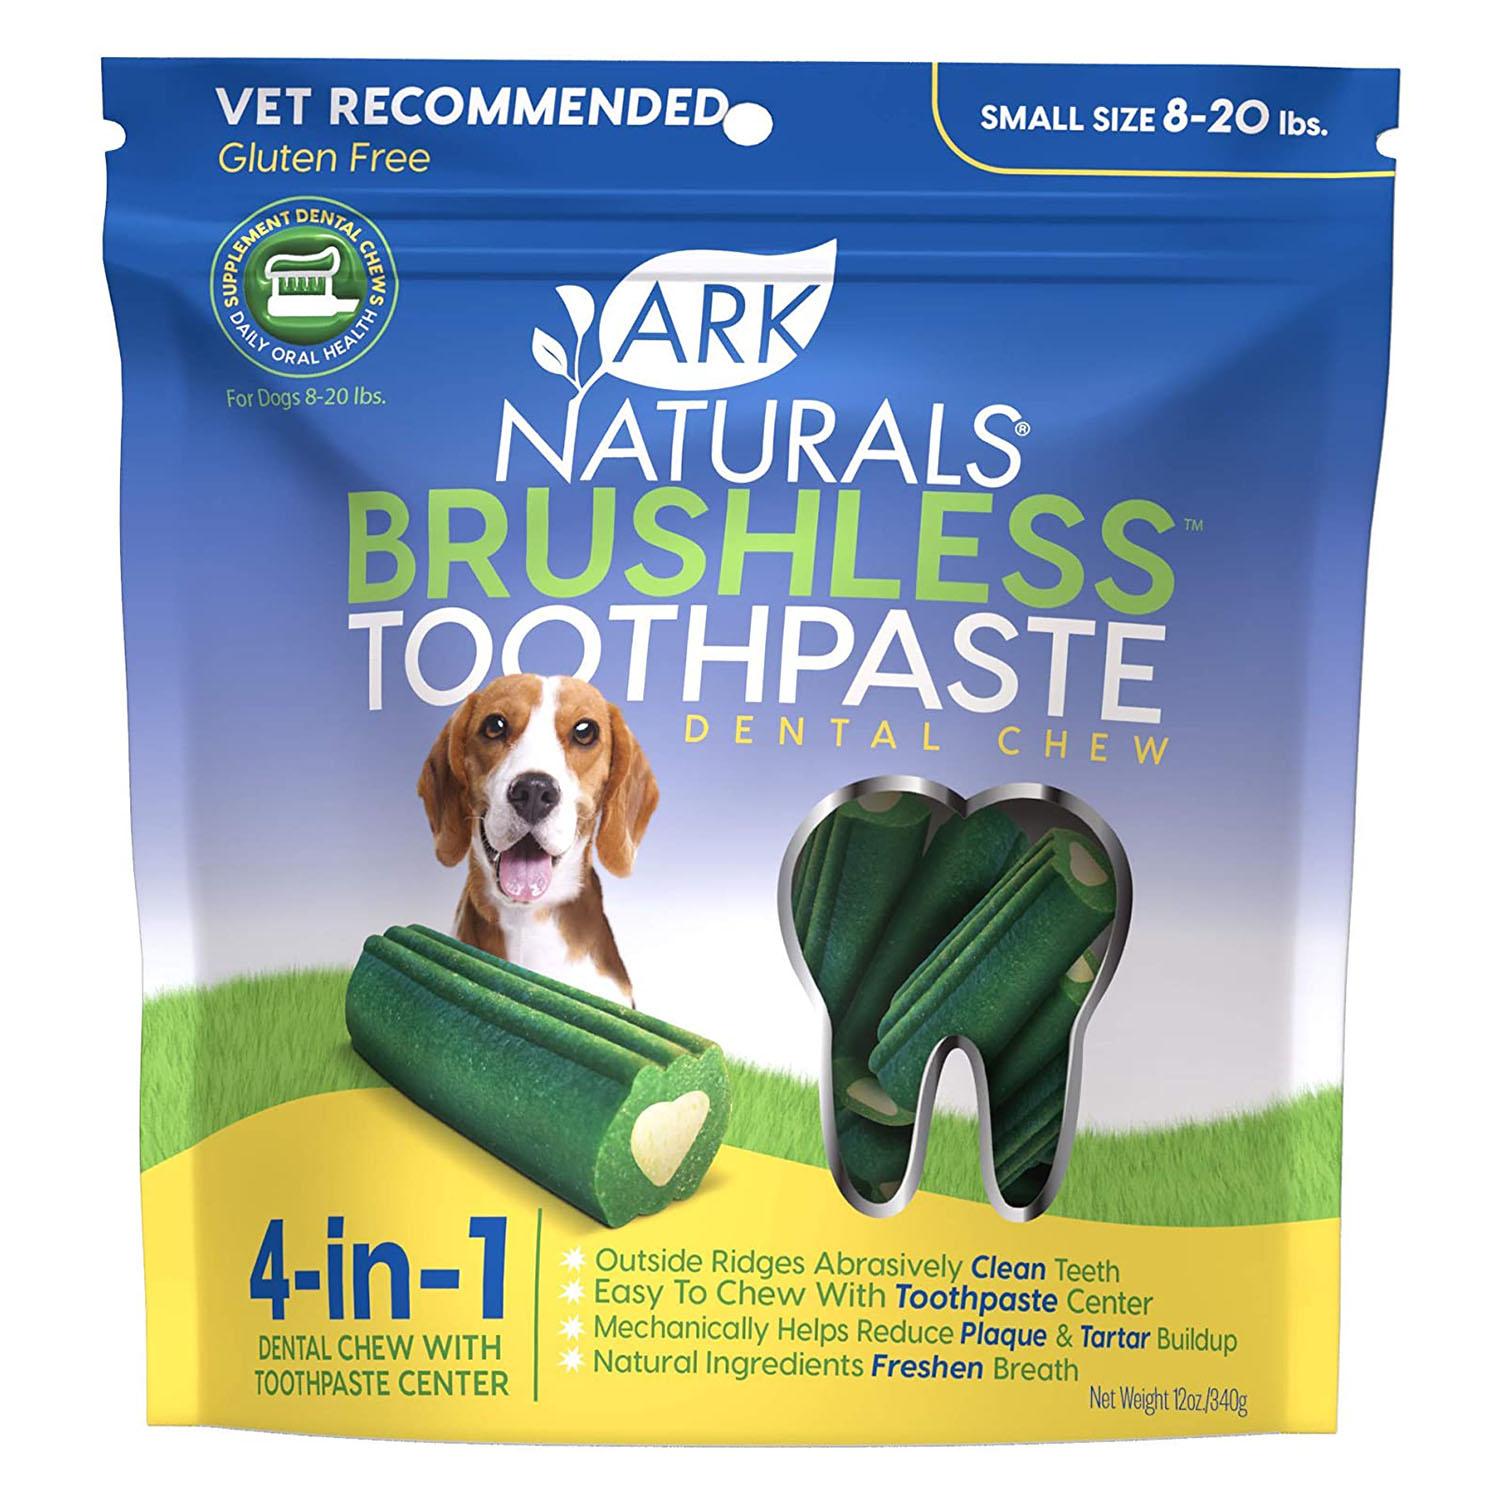 ark-naturals-brushless-toothpaste-dog-chews